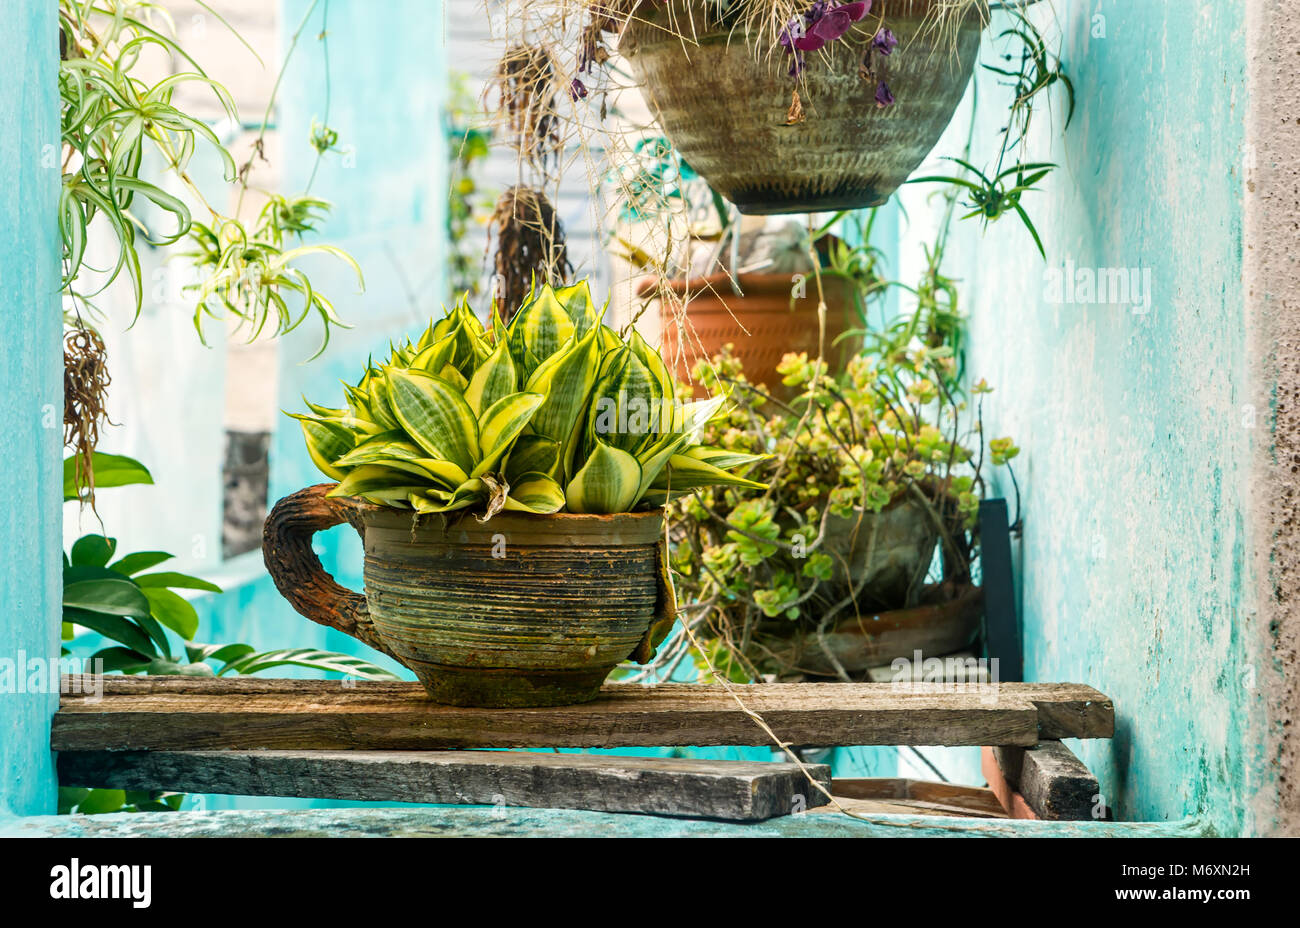 Tropical Plants on a Porch at a Home in Cuba Stock Photo